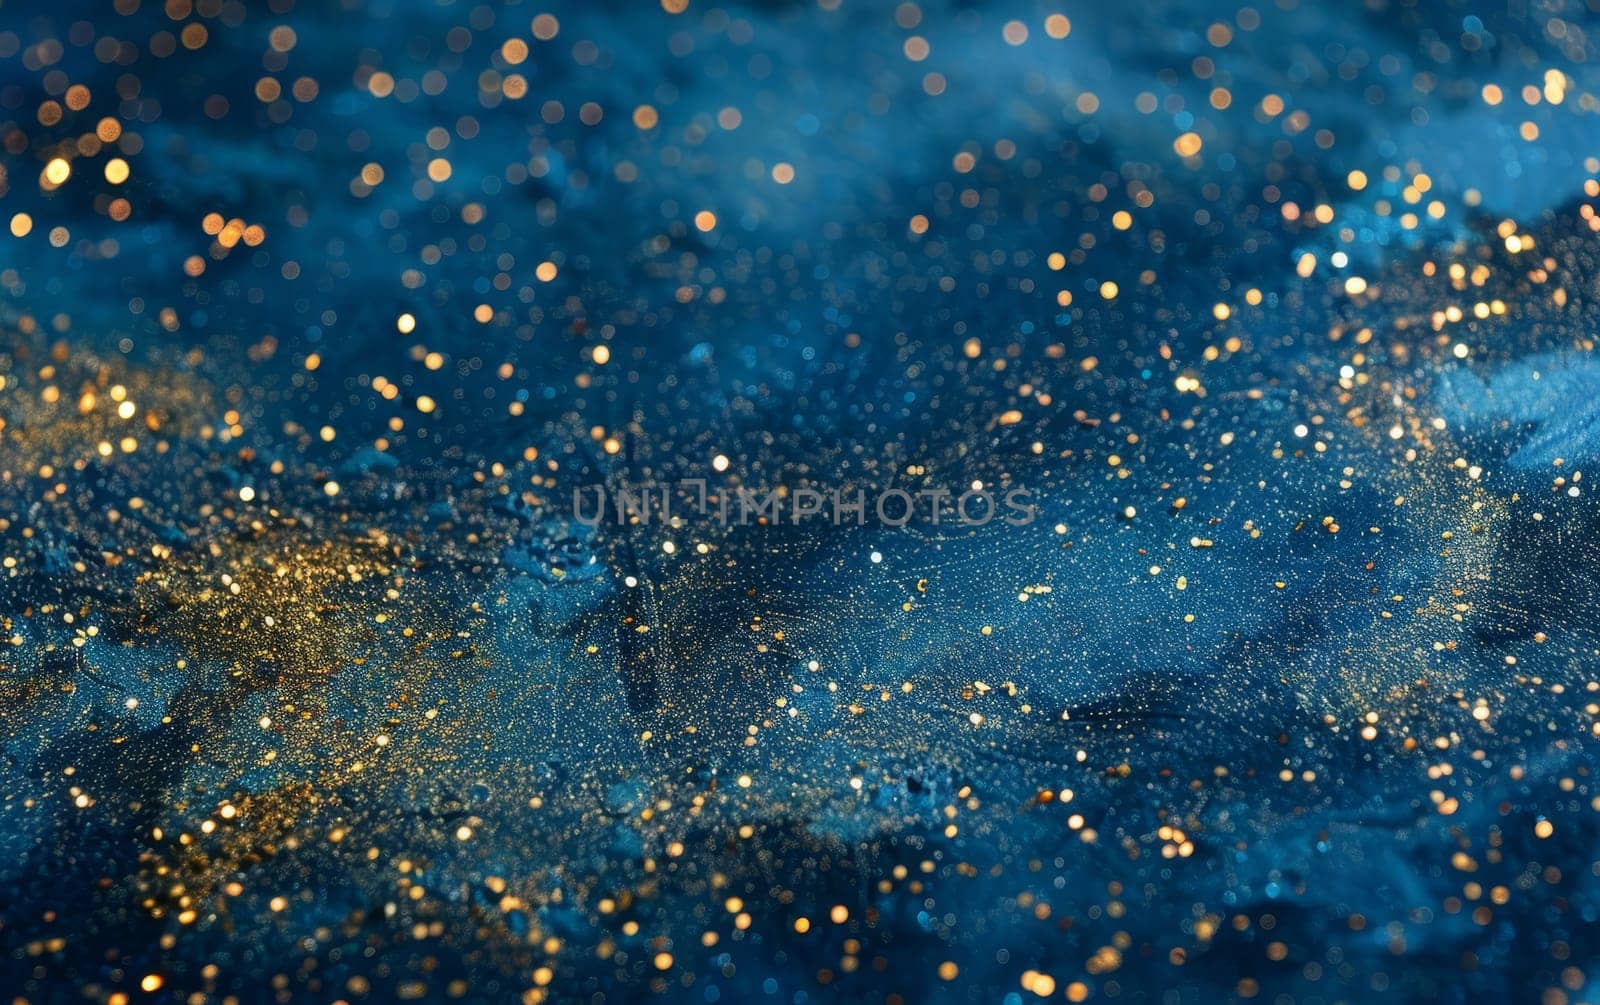 An abstract textured pattern with deep cosmic blue hues sprinkled with glints of gold, evoking the infinite depth of a star-studded galaxy